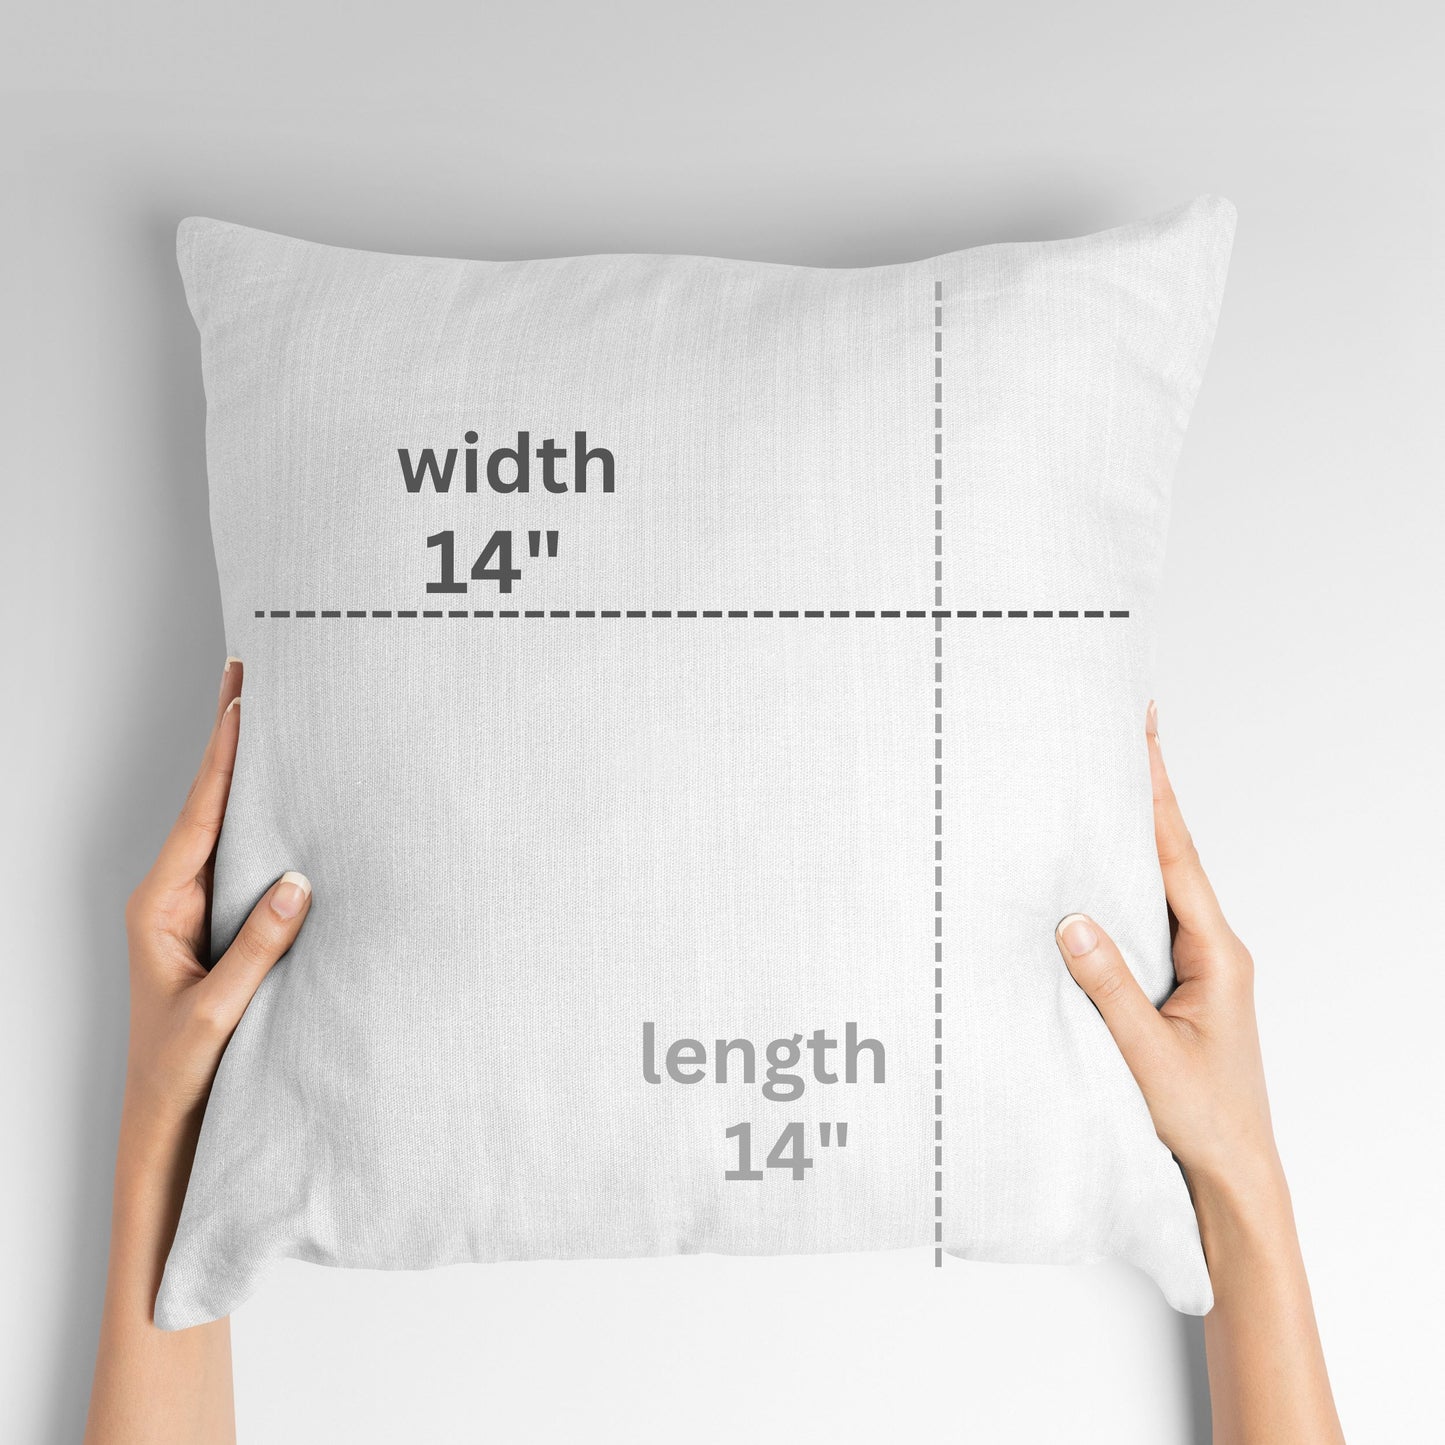 Please leave by 9 Throw Pillow